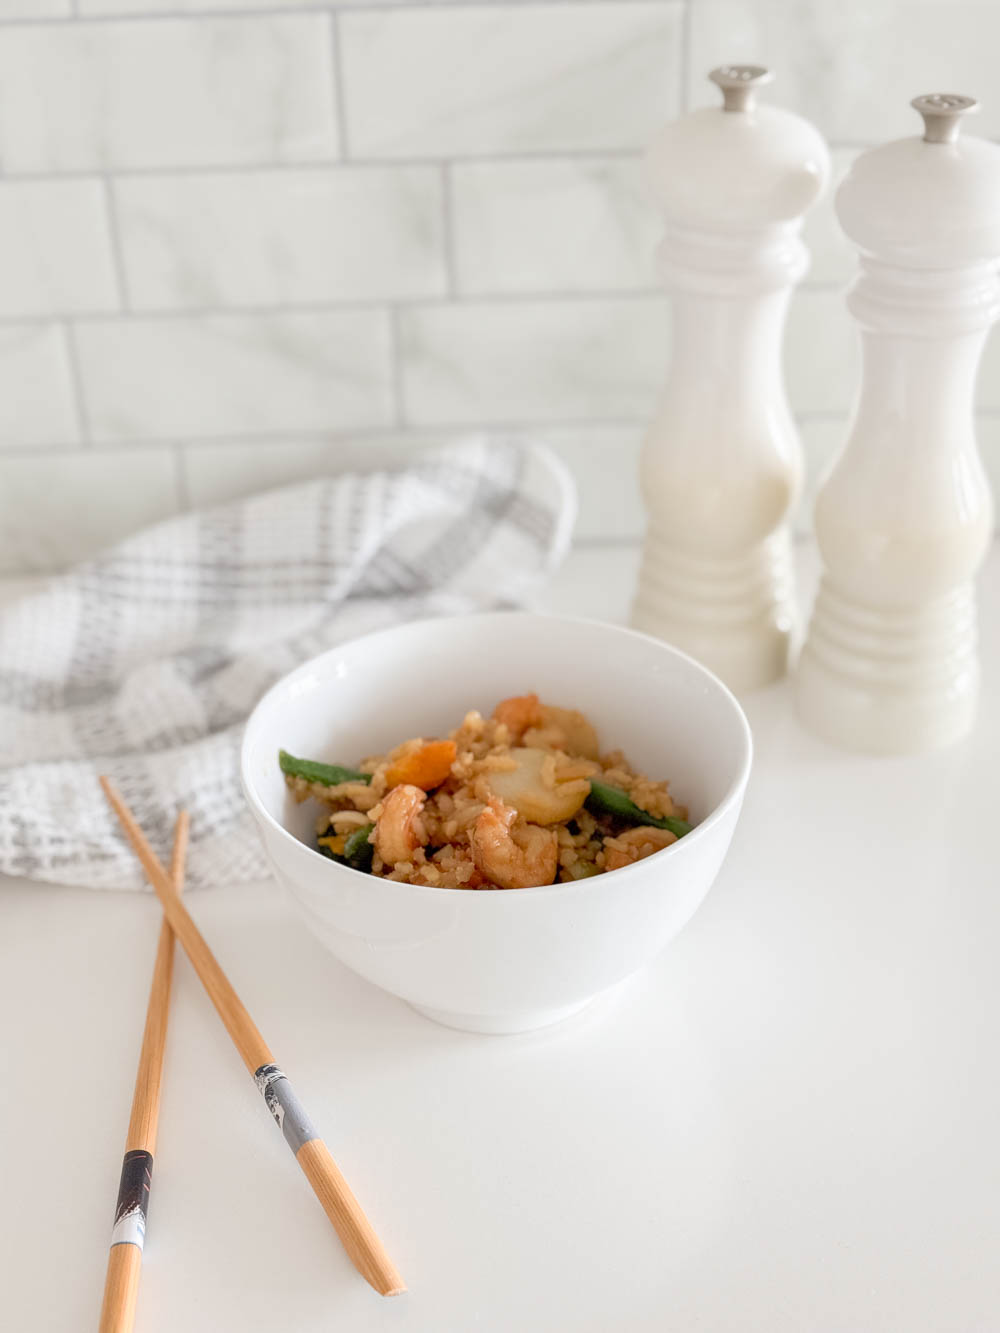 Easy shrimp stir fry served in a white bowl, accompanied by a tea towel, chop sticks and salt and pepper shakers